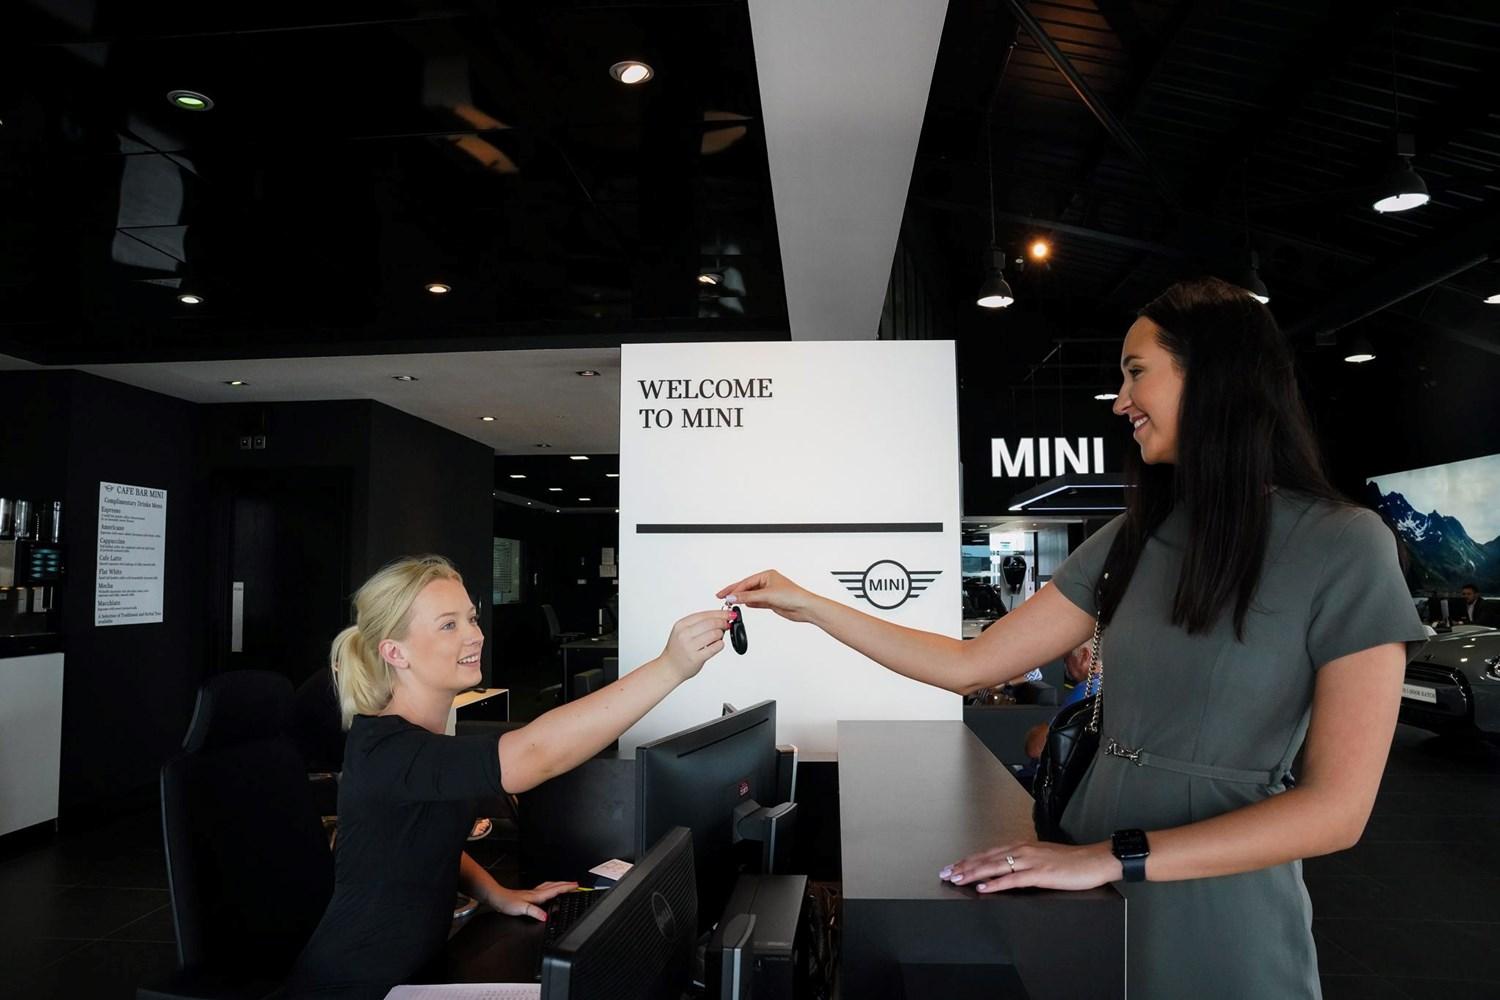 MINI Sales Specialist hands new car keys over to customer at the reception of Bavarian MINI